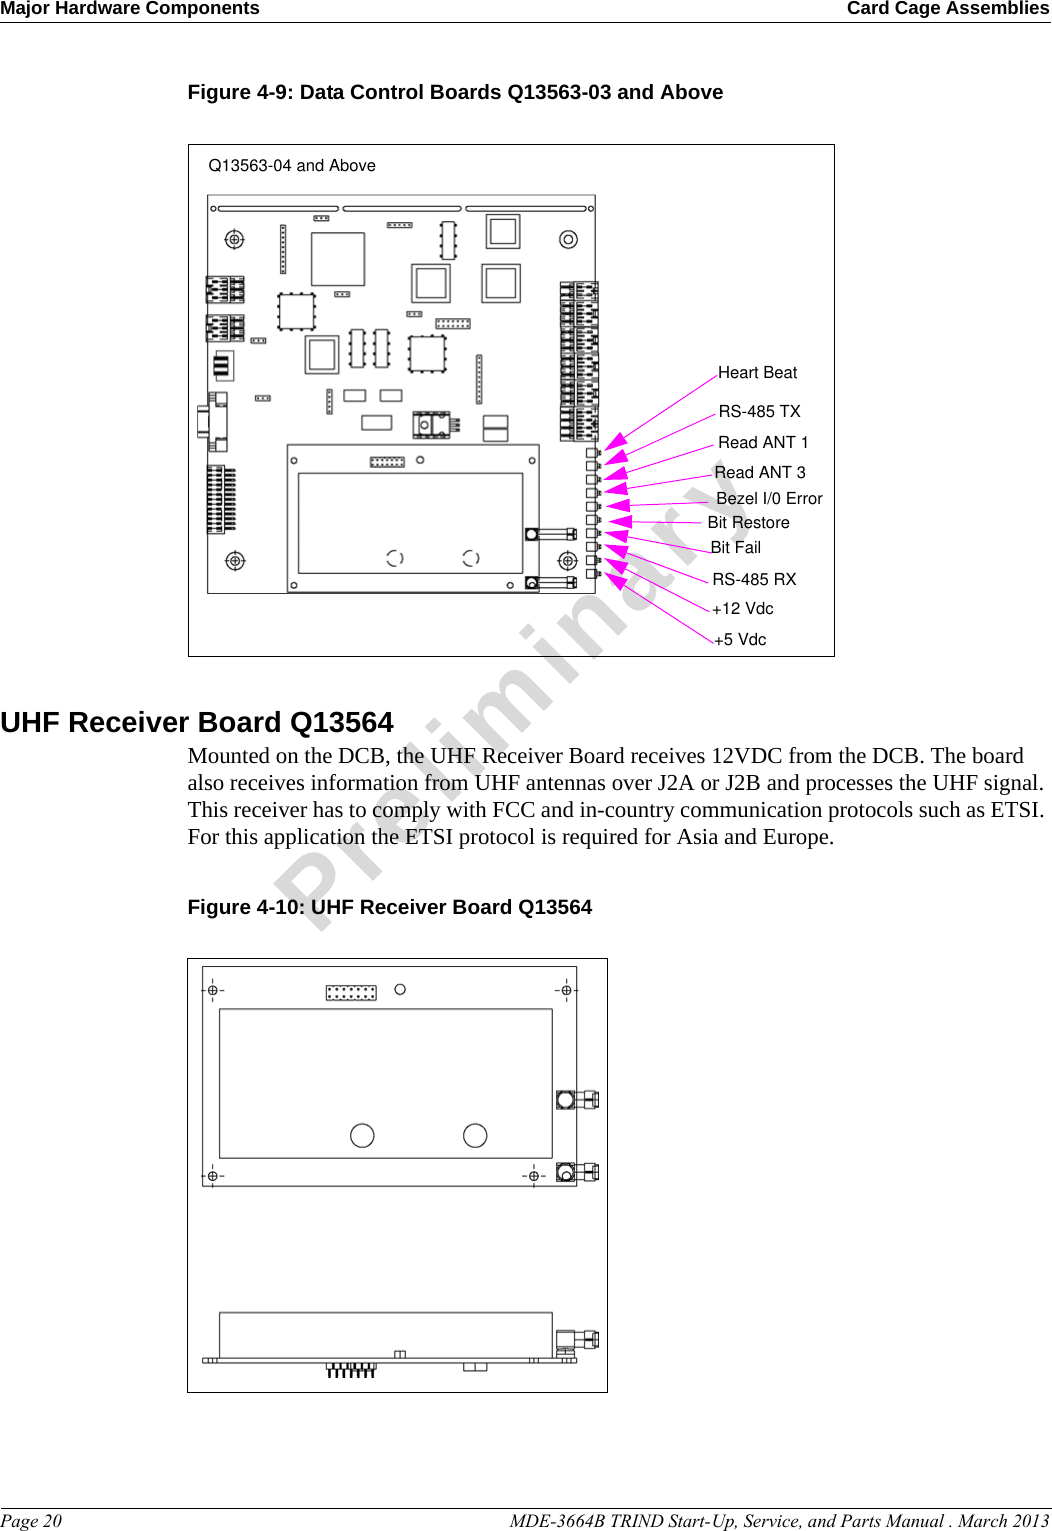 Major Hardware Components Card Cage AssembliesPage 20                                                                                                  MDE-3664B TRIND Start-Up, Service, and Parts Manual . March 2013PreliminaryFigure 4-9: Data Control Boards Q13563-03 and AboveQ13563-04 and AboveHeart BeatRS-485 TXRead ANT 1Read ANT 3Bezel I/0 ErrorBit RestoreBit FailRS-485 RX+12 Vdc+5 VdcUHF Receiver Board Q13564Mounted on the DCB, the UHF Receiver Board receives 12VDC from the DCB. The board also receives information from UHF antennas over J2A or J2B and processes the UHF signal. This receiver has to comply with FCC and in-country communication protocols such as ETSI. For this application the ETSI protocol is required for Asia and Europe.Figure 4-10: UHF Receiver Board Q13564